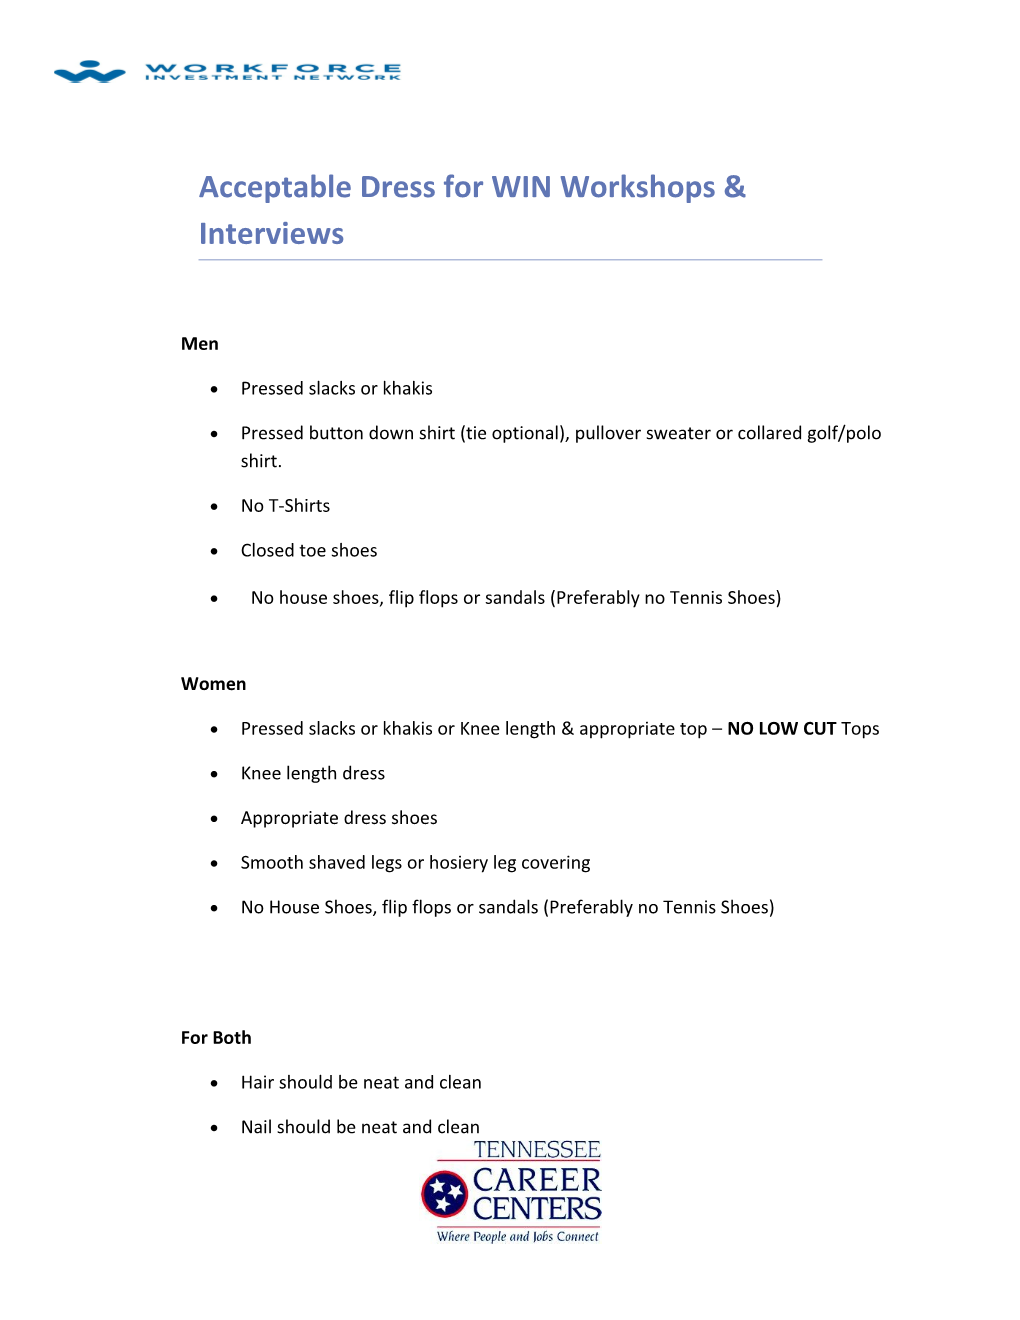 Acceptable Dress for WIN Workshops & Interviews